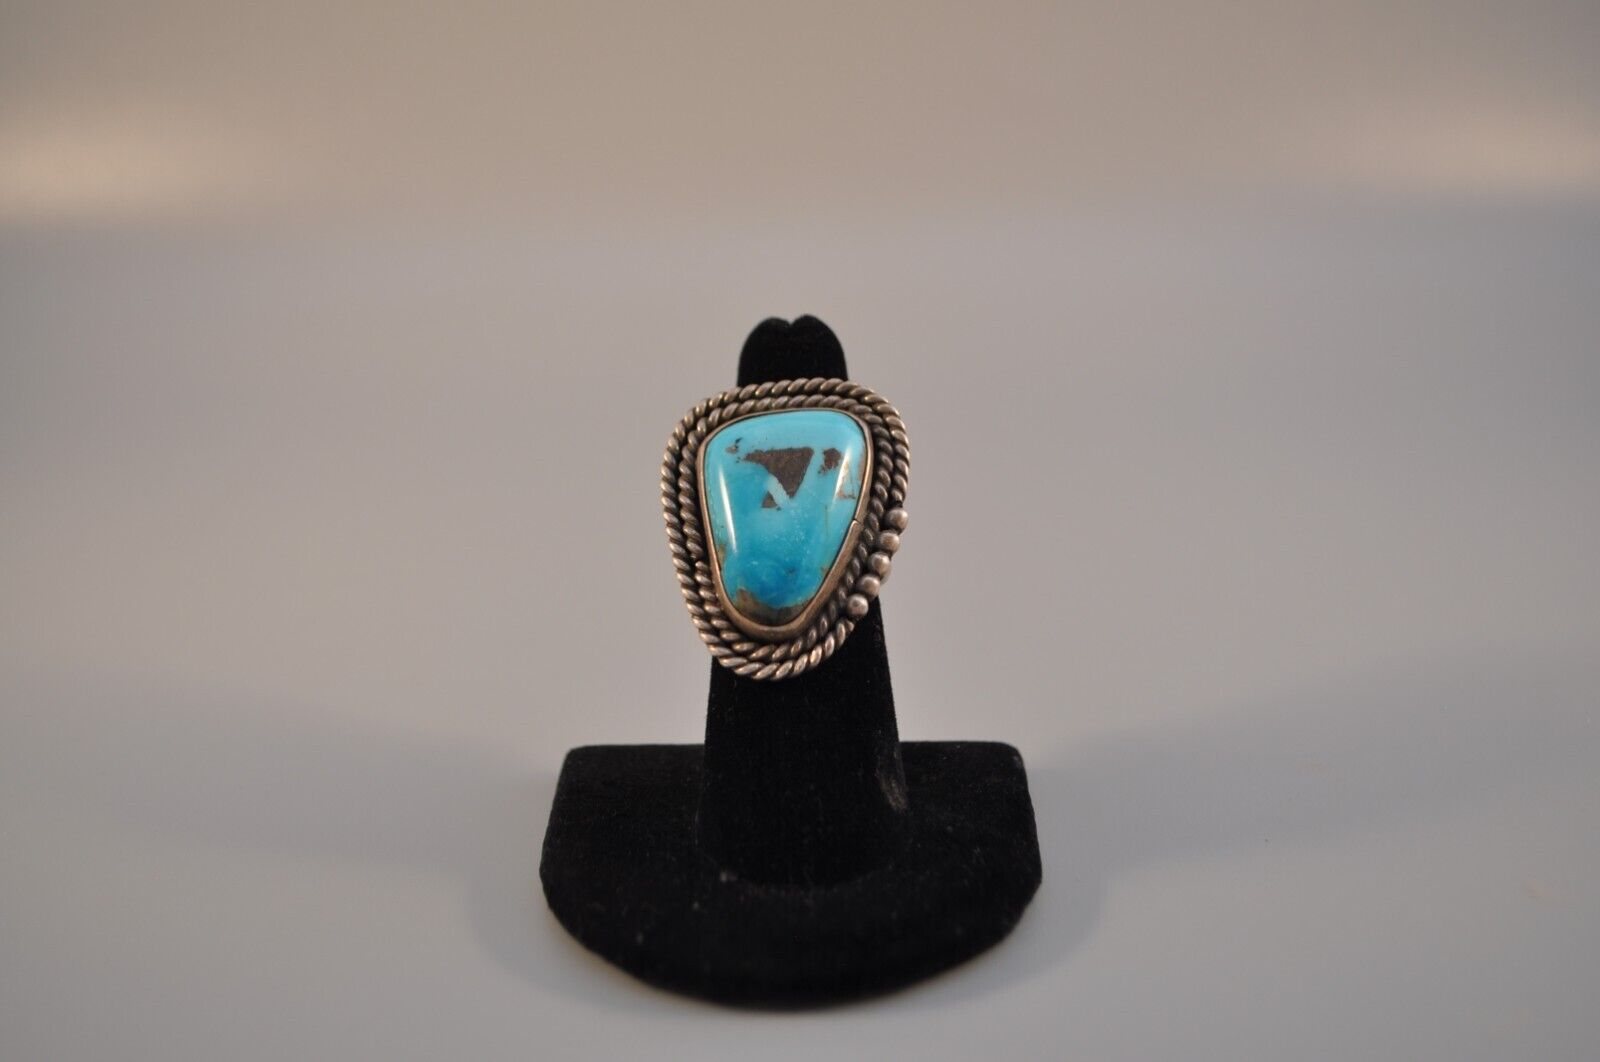 Vintage Navajo Indian Sterling Silver Ring -  Large Turquoise Stone - Size 6